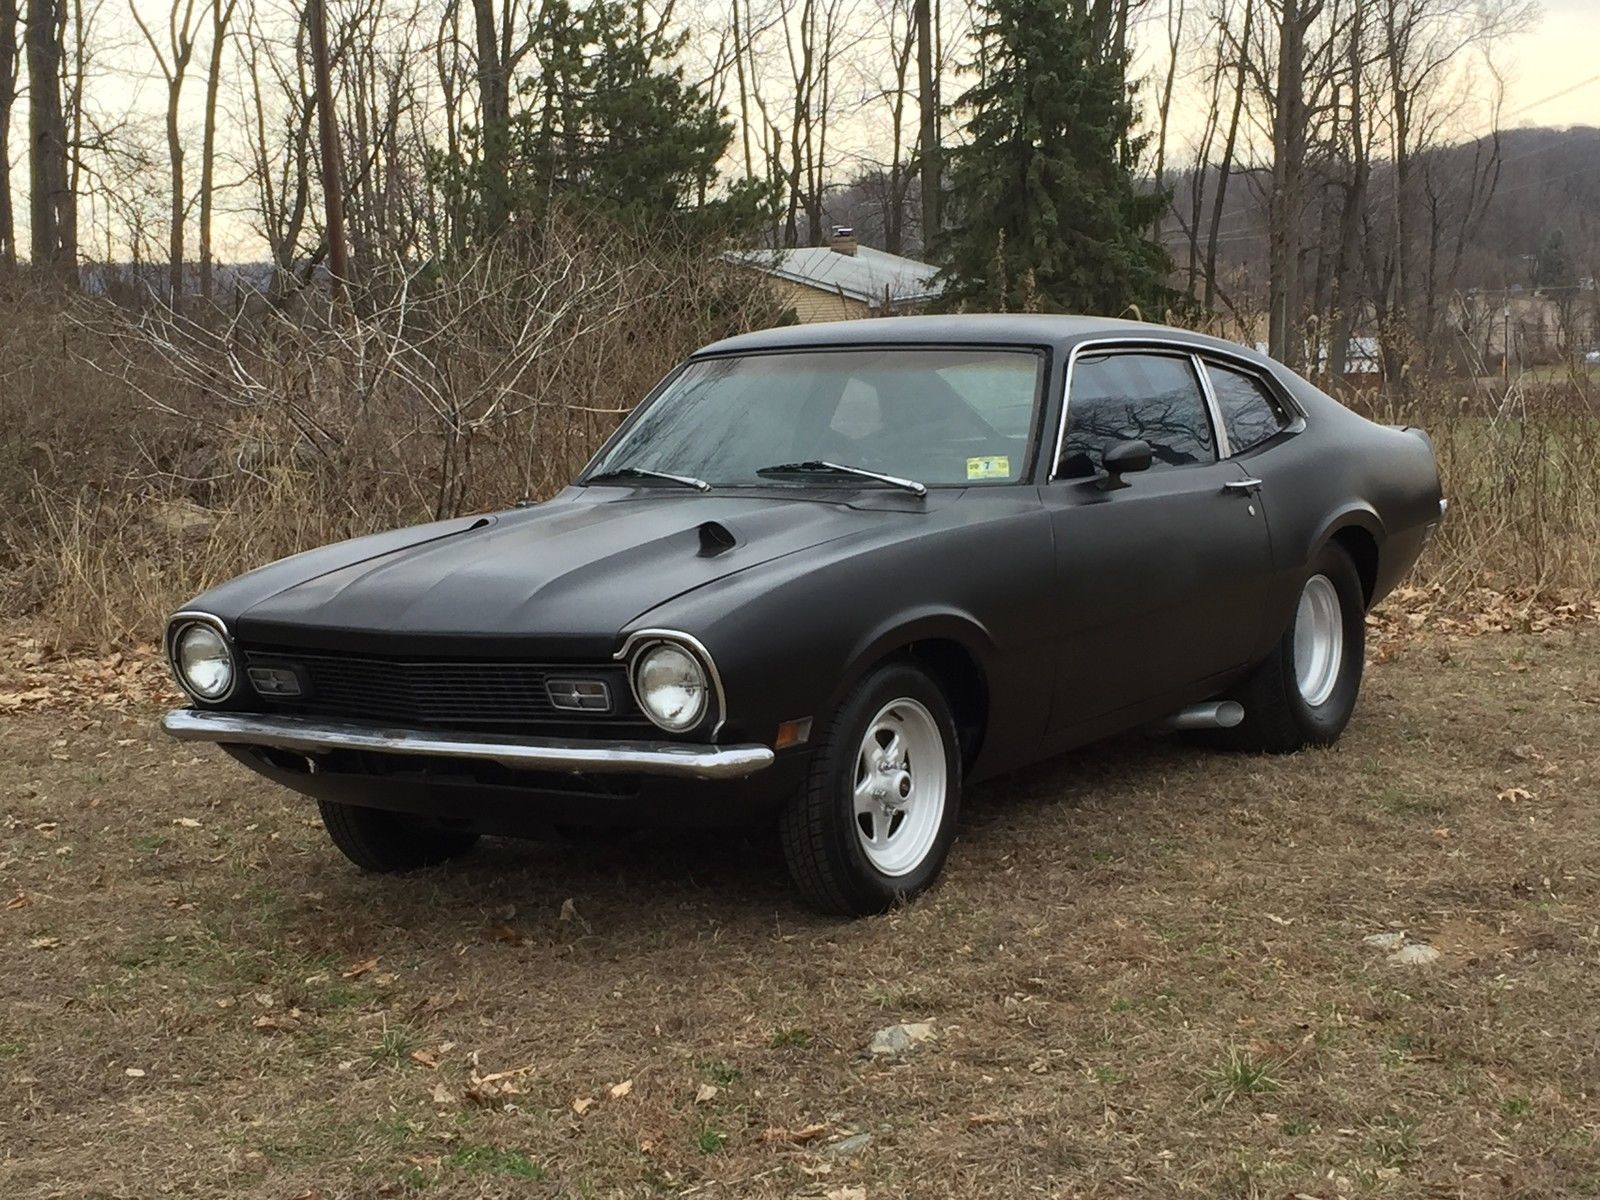 This Pro Street Ford Maverick Is Everything A Car Needs…It’s Black, Nasty And Stout!